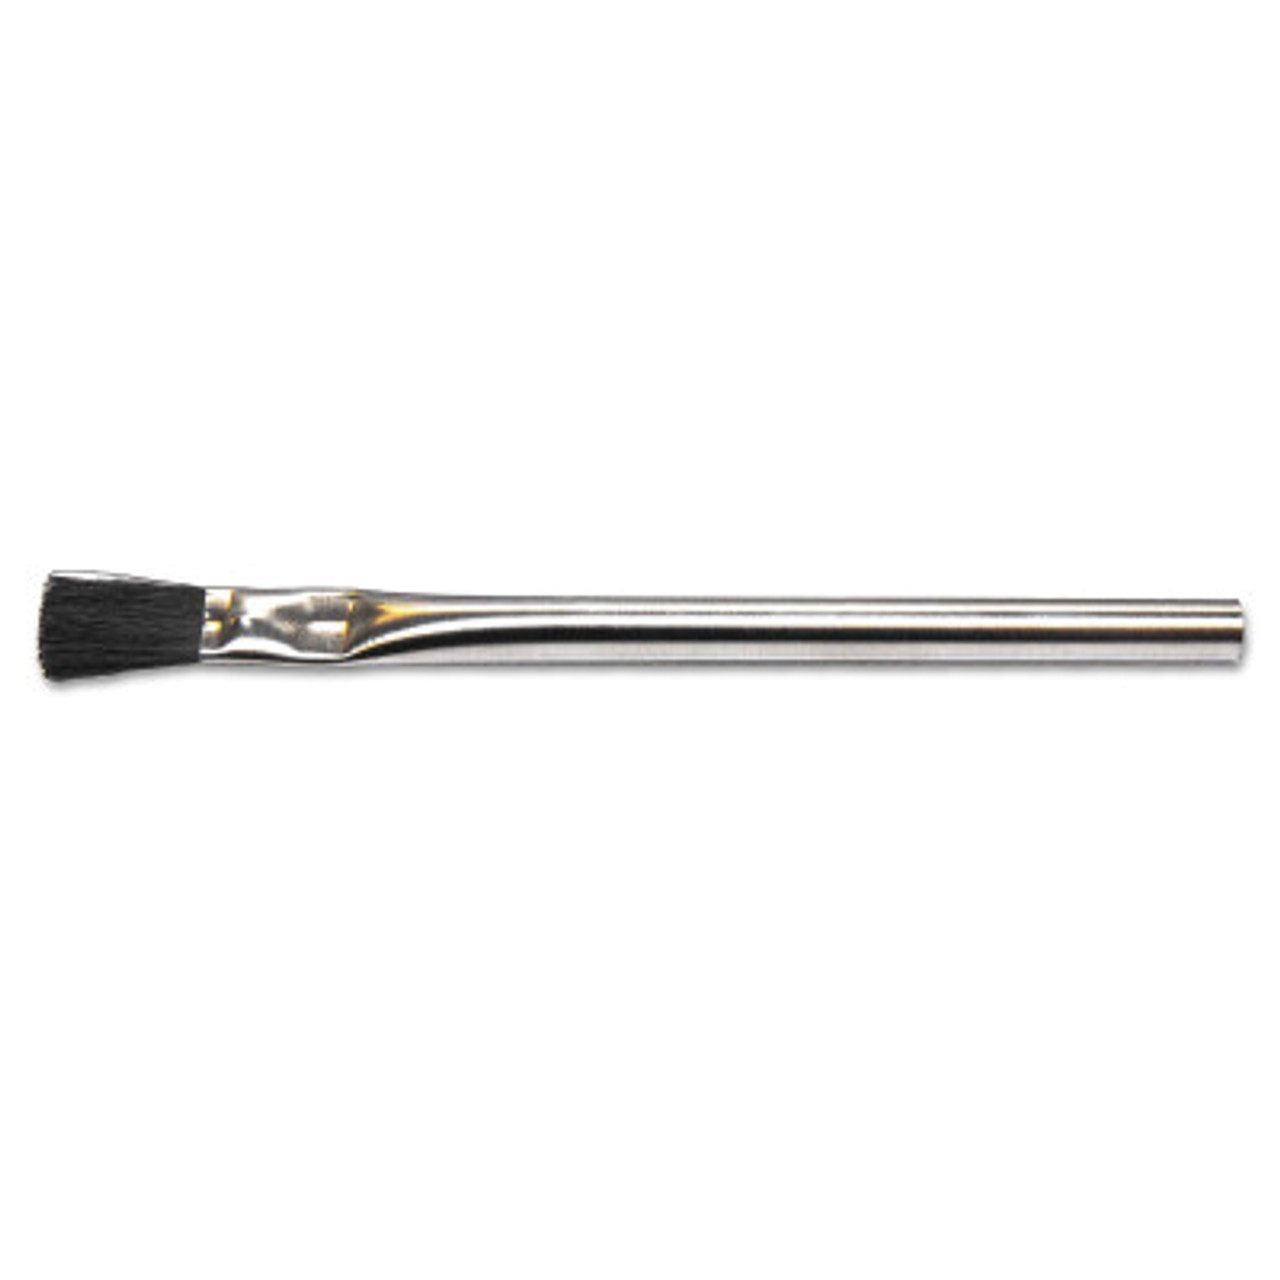 Anchor Products Acid Brushes, 3/8 in Width, Black Horsehair, 144 GS